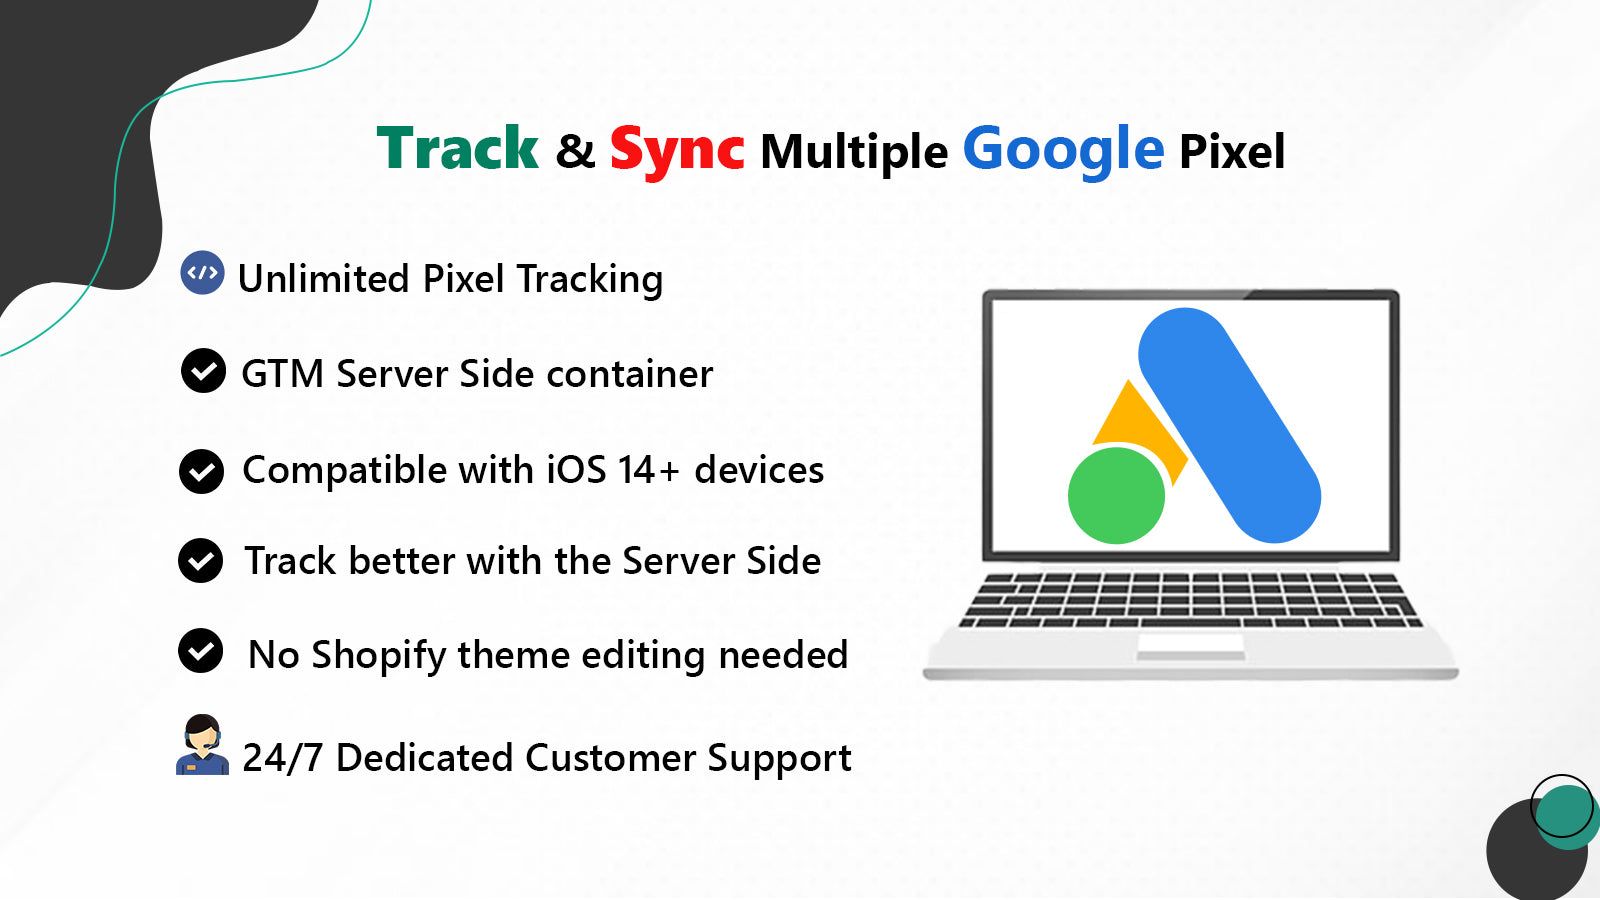 Sync Multiple Google Server Side conversion tracking